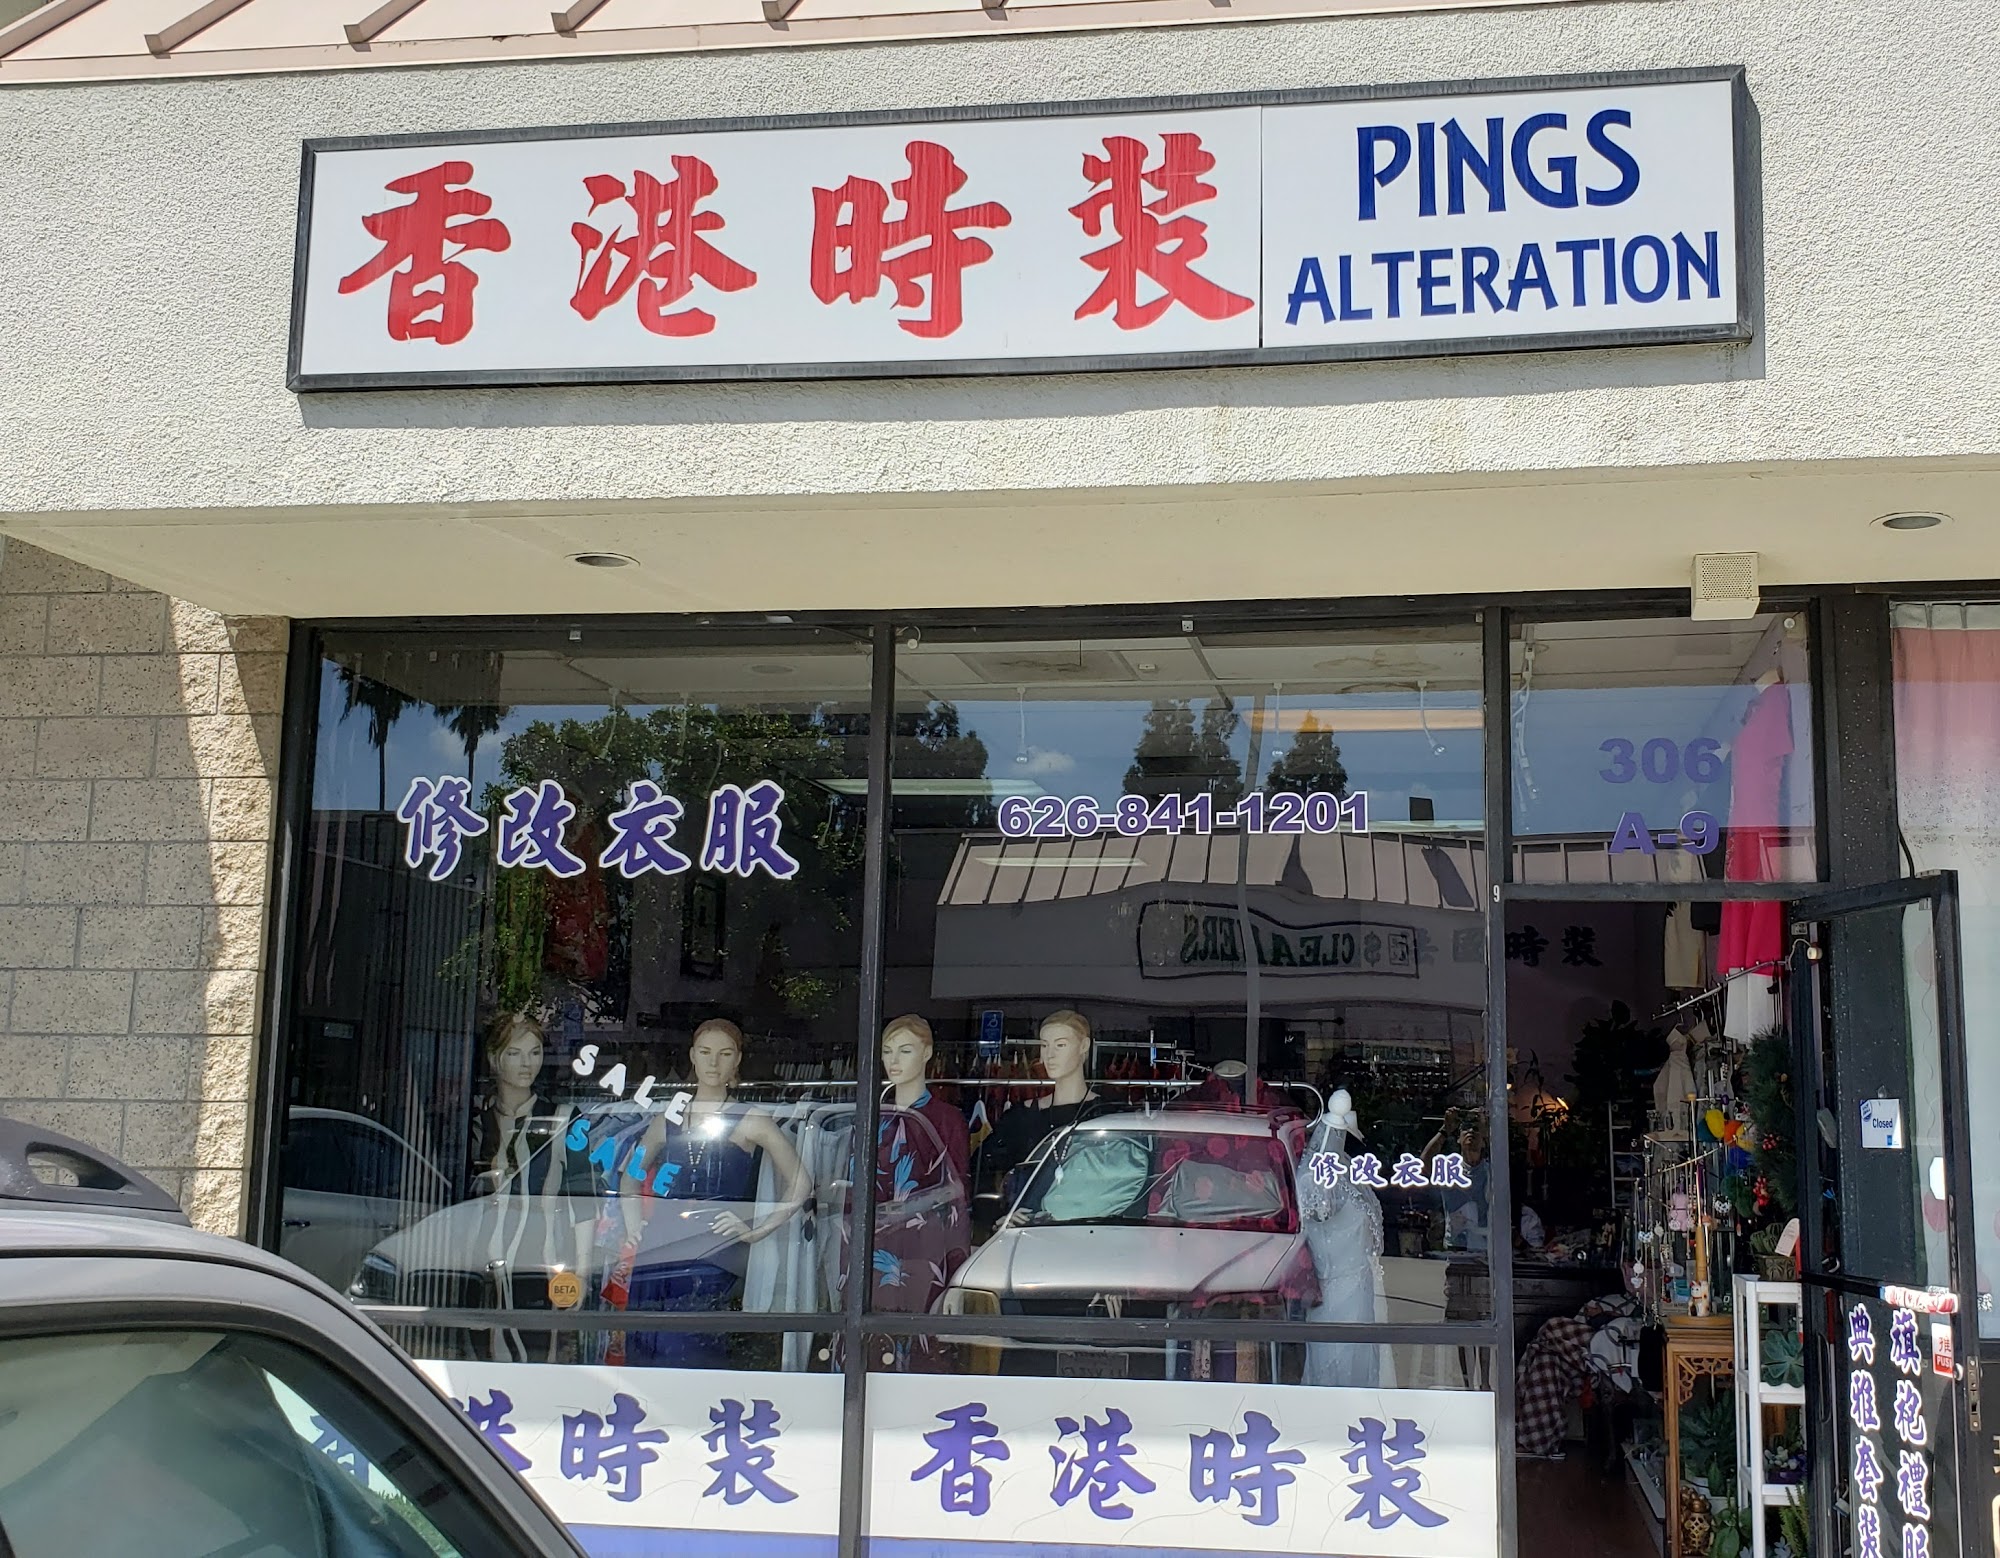 Ping's Alteration